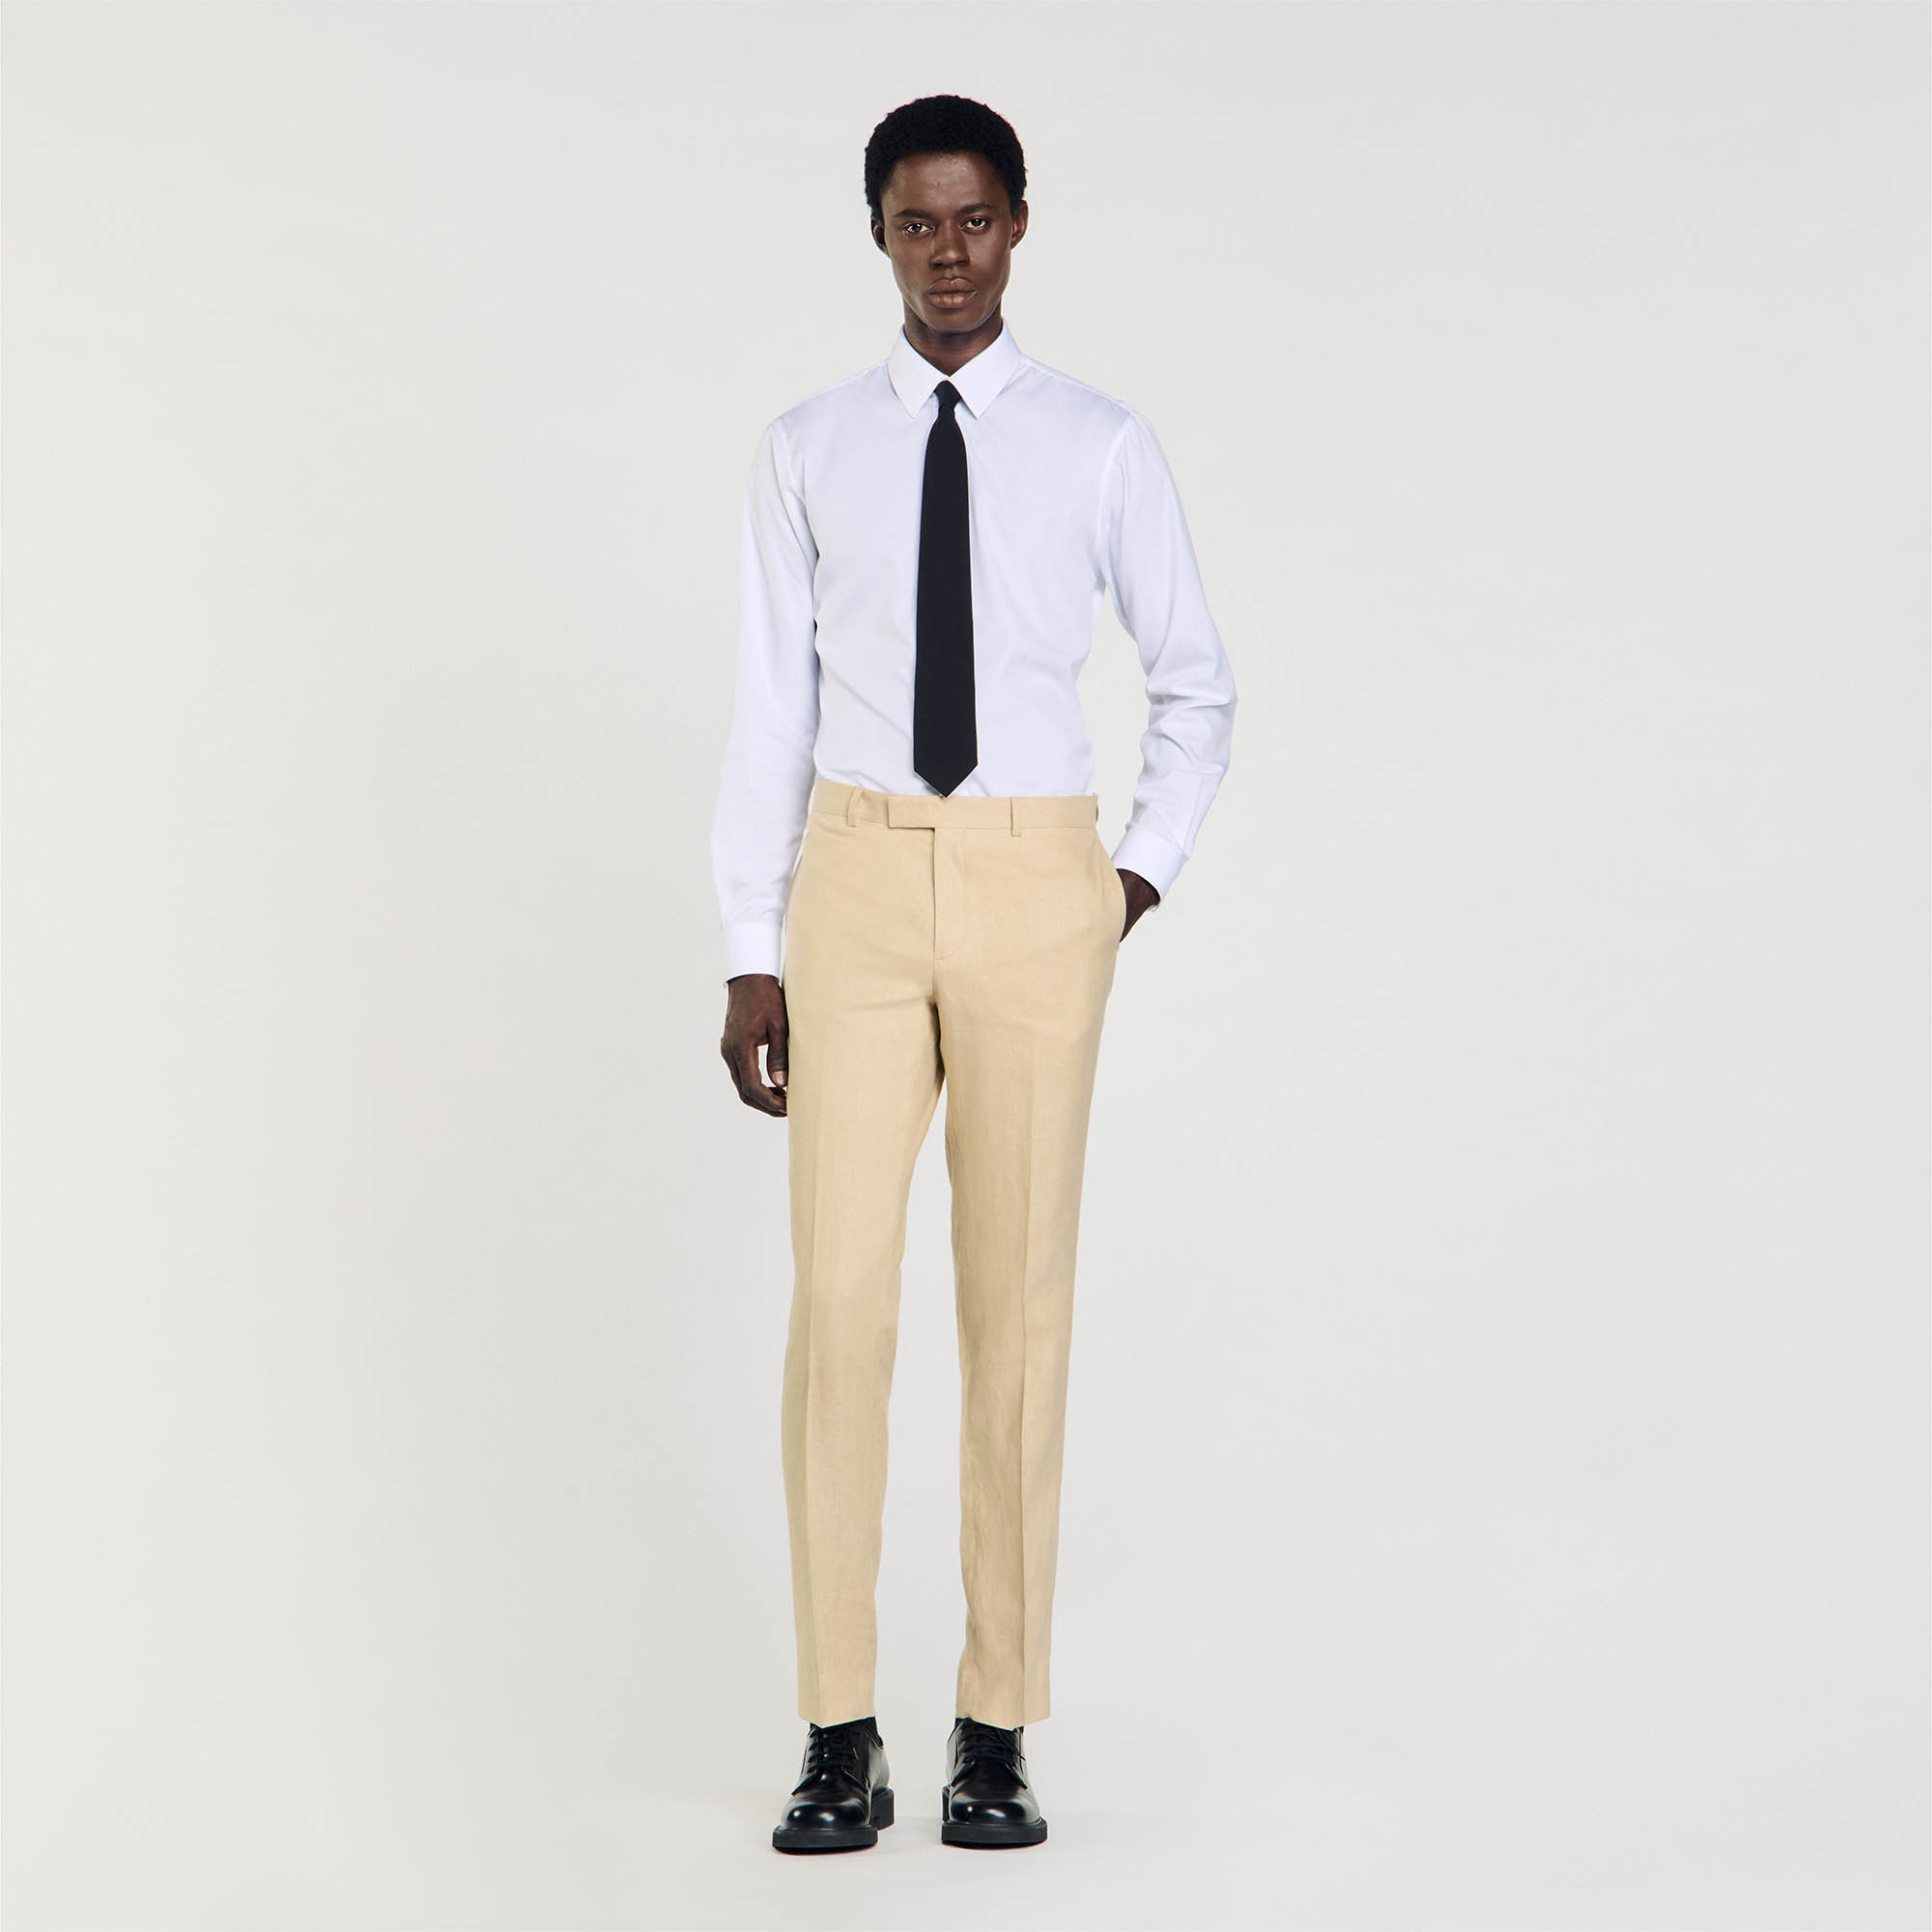 Sandro linen Belt lining: Linen suit trousers with a classic cut, side pockets, and piped back pockets